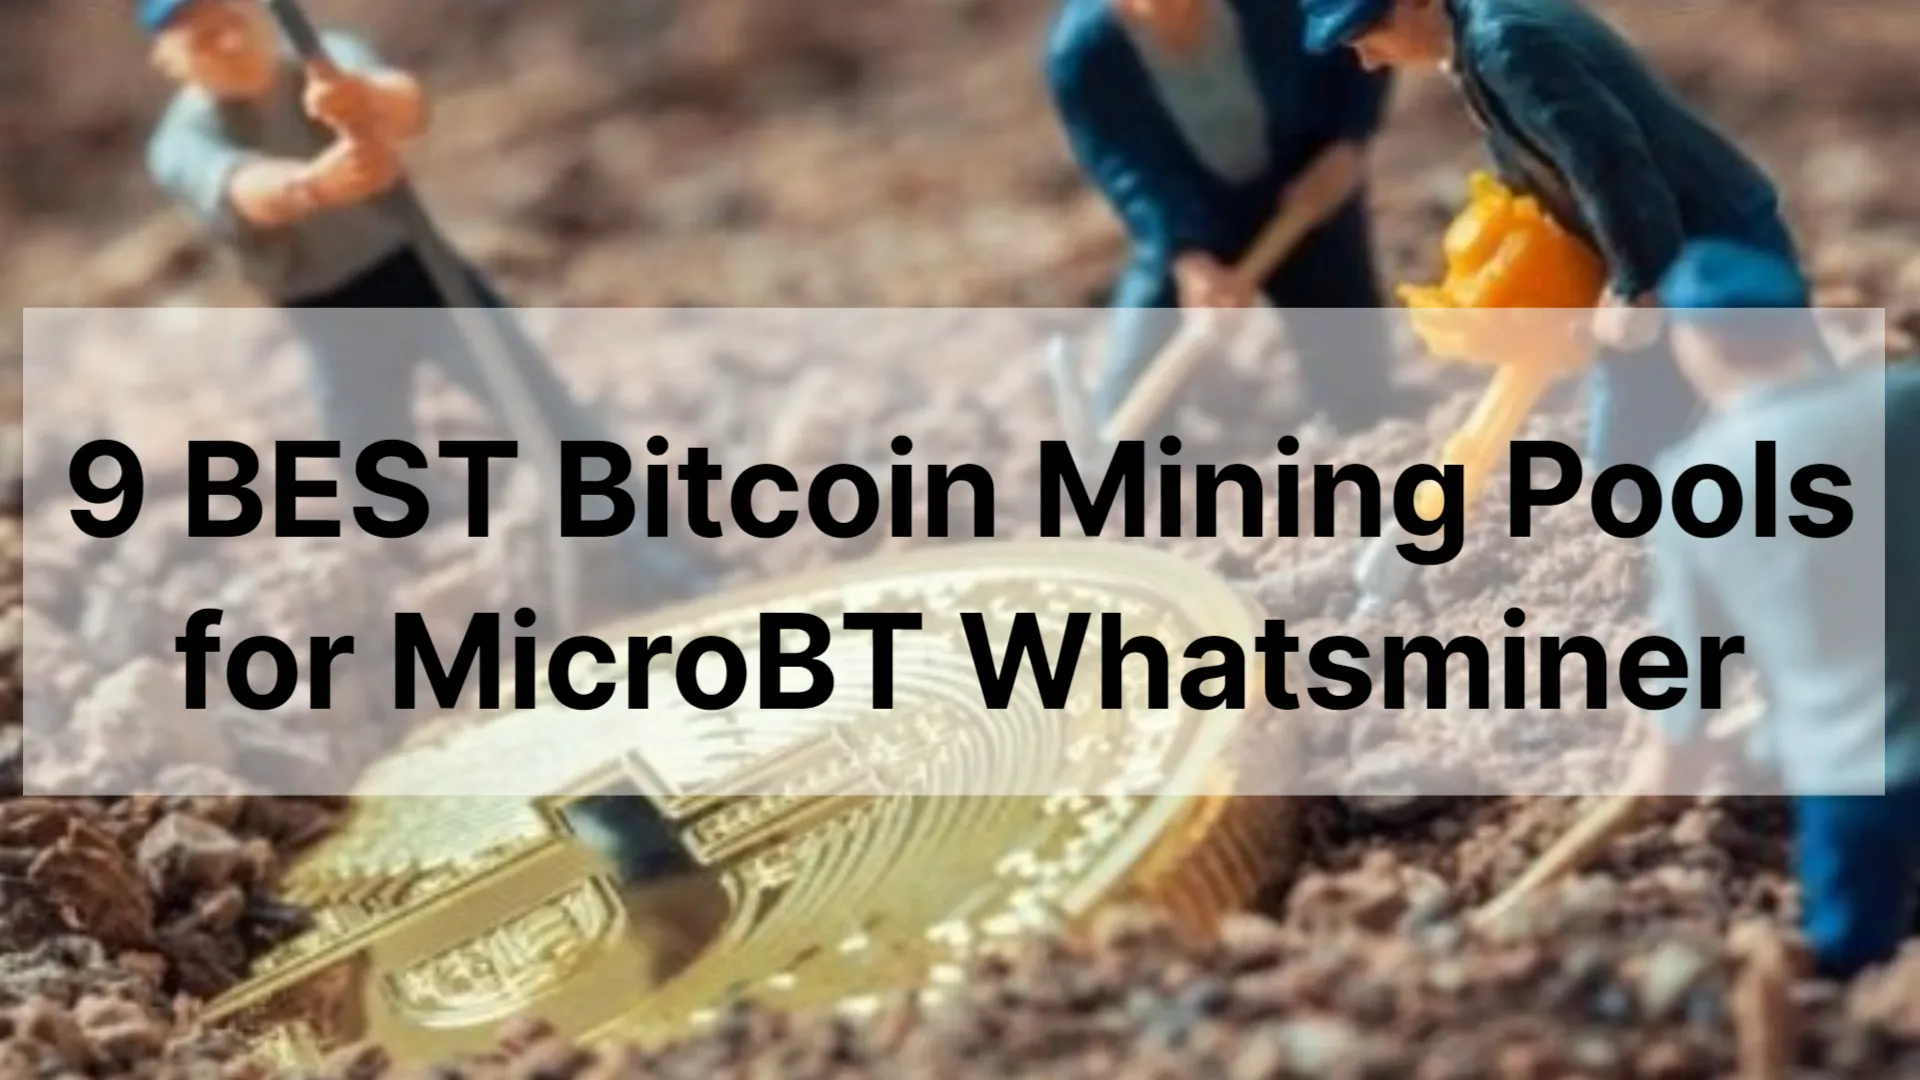 9 BEST Bitcoin Mining Pools for Whatsminer